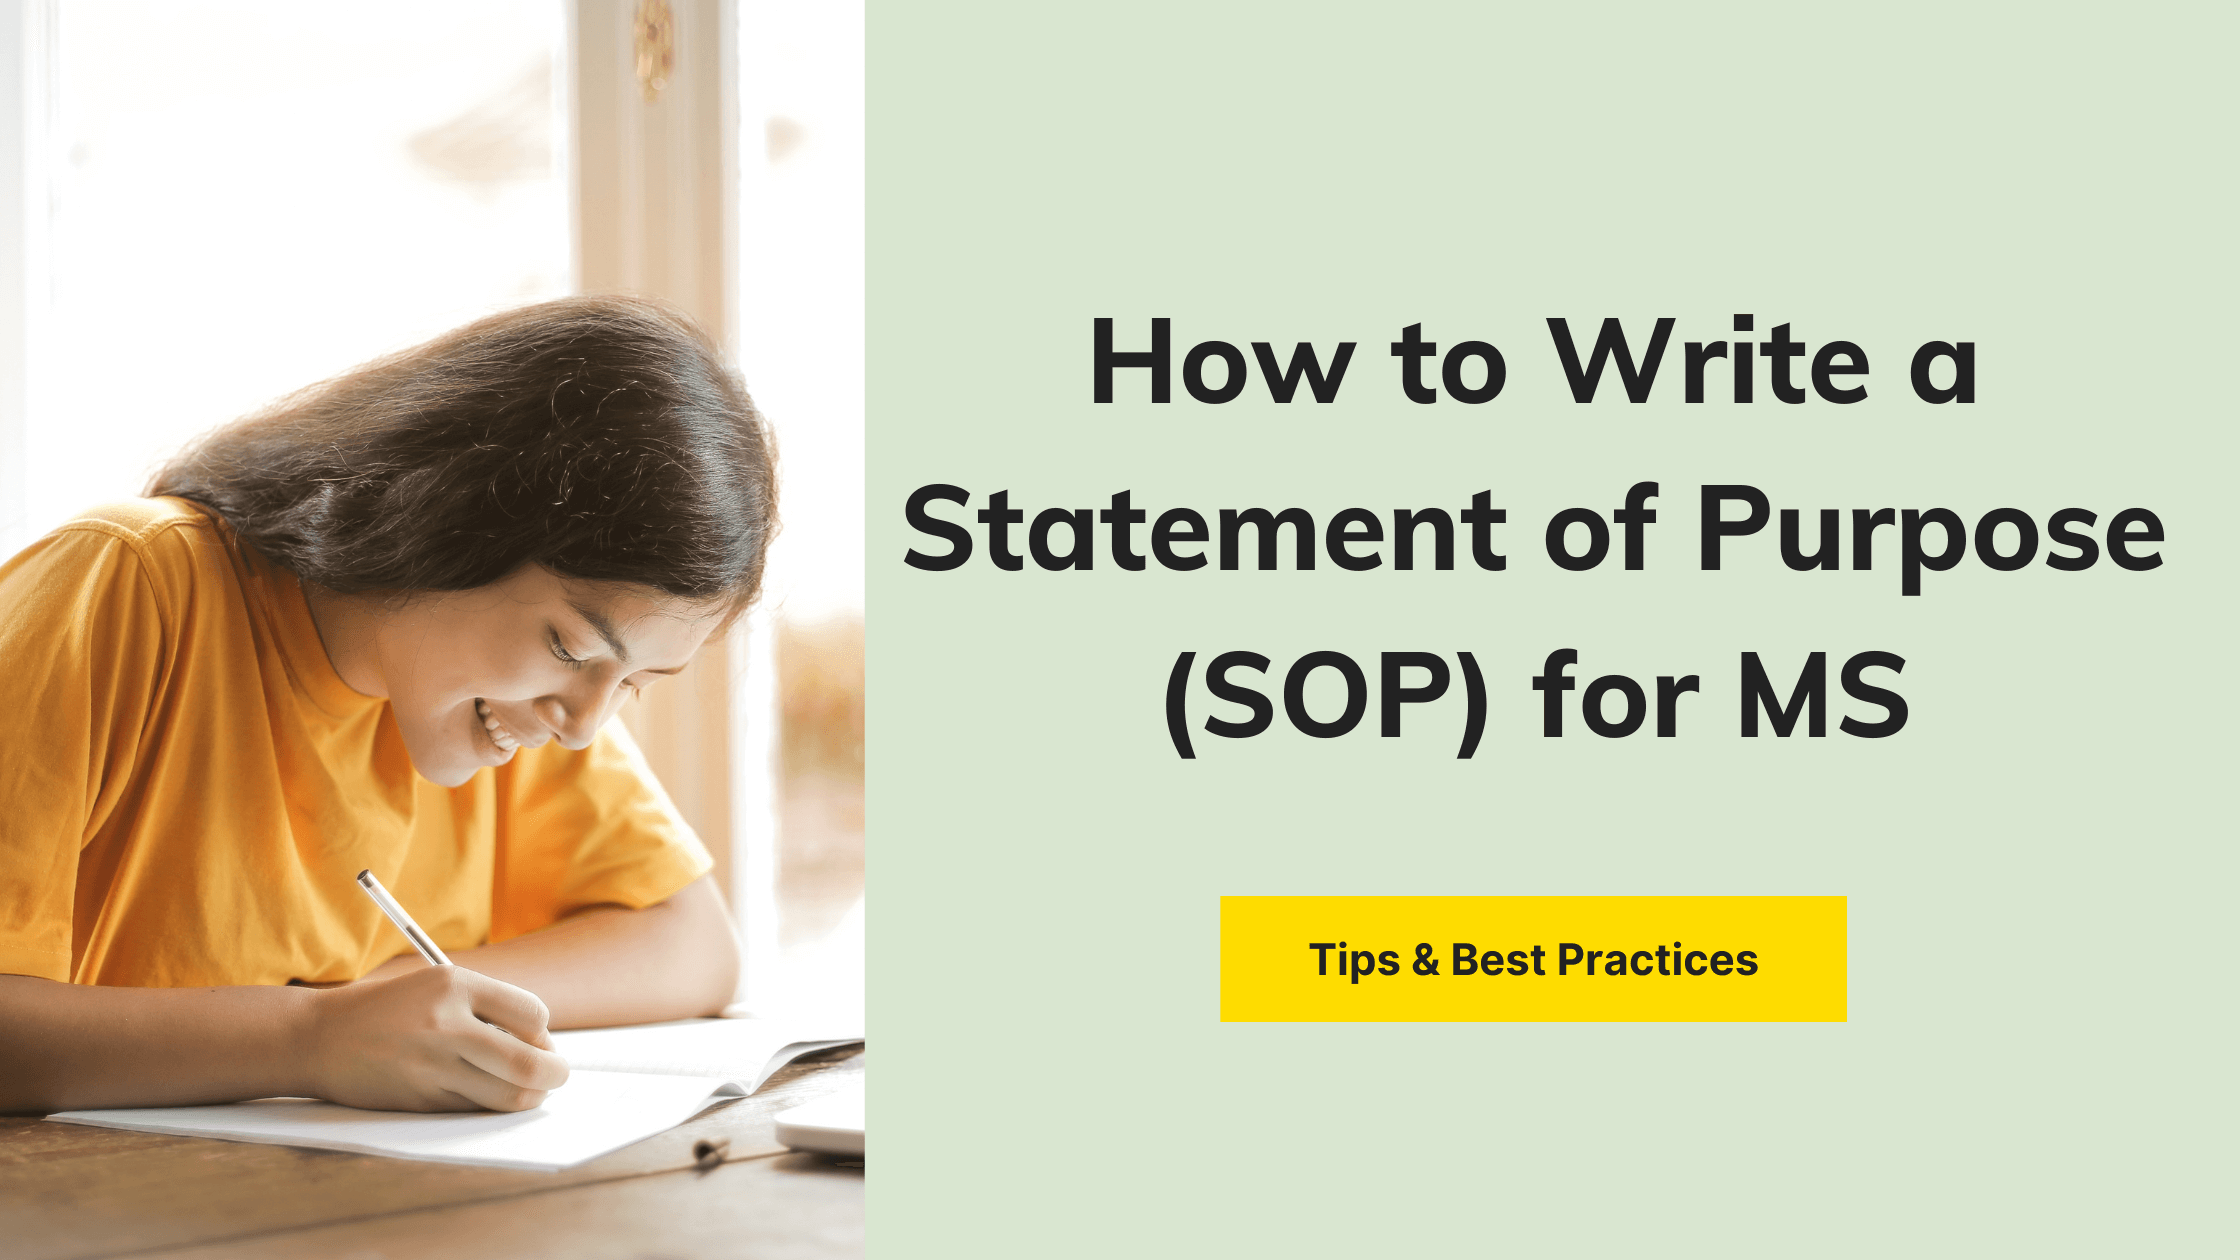 How to Write a Statement of Purpose (SOP) for MS